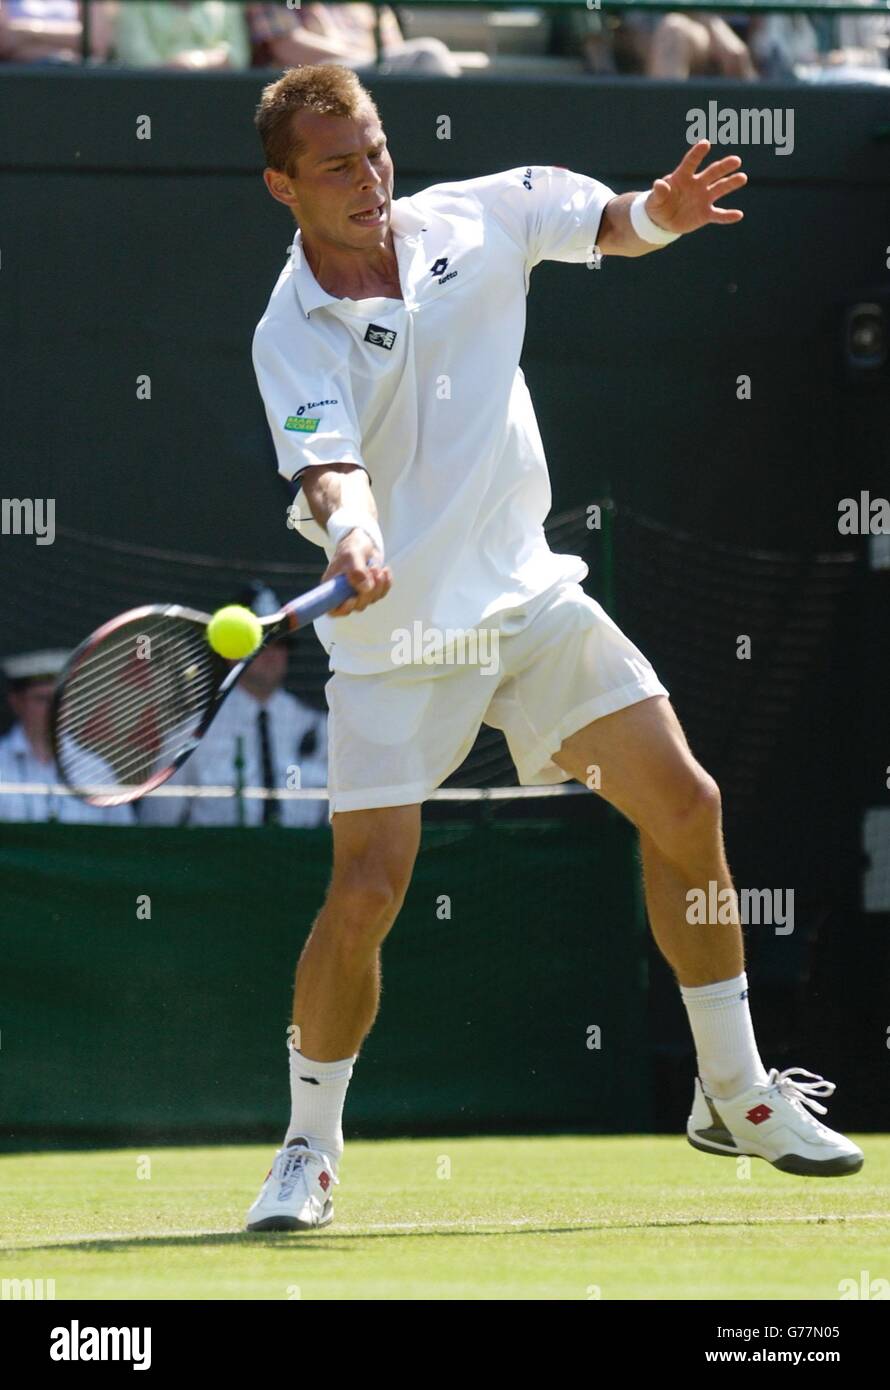 , NO MOBILE PHONE USE. Tomas Zib of the Czech Republic in action against British tennis star Tim Henman at the All England Lawn Tennis Championships in Wimbledon. Stock Photo